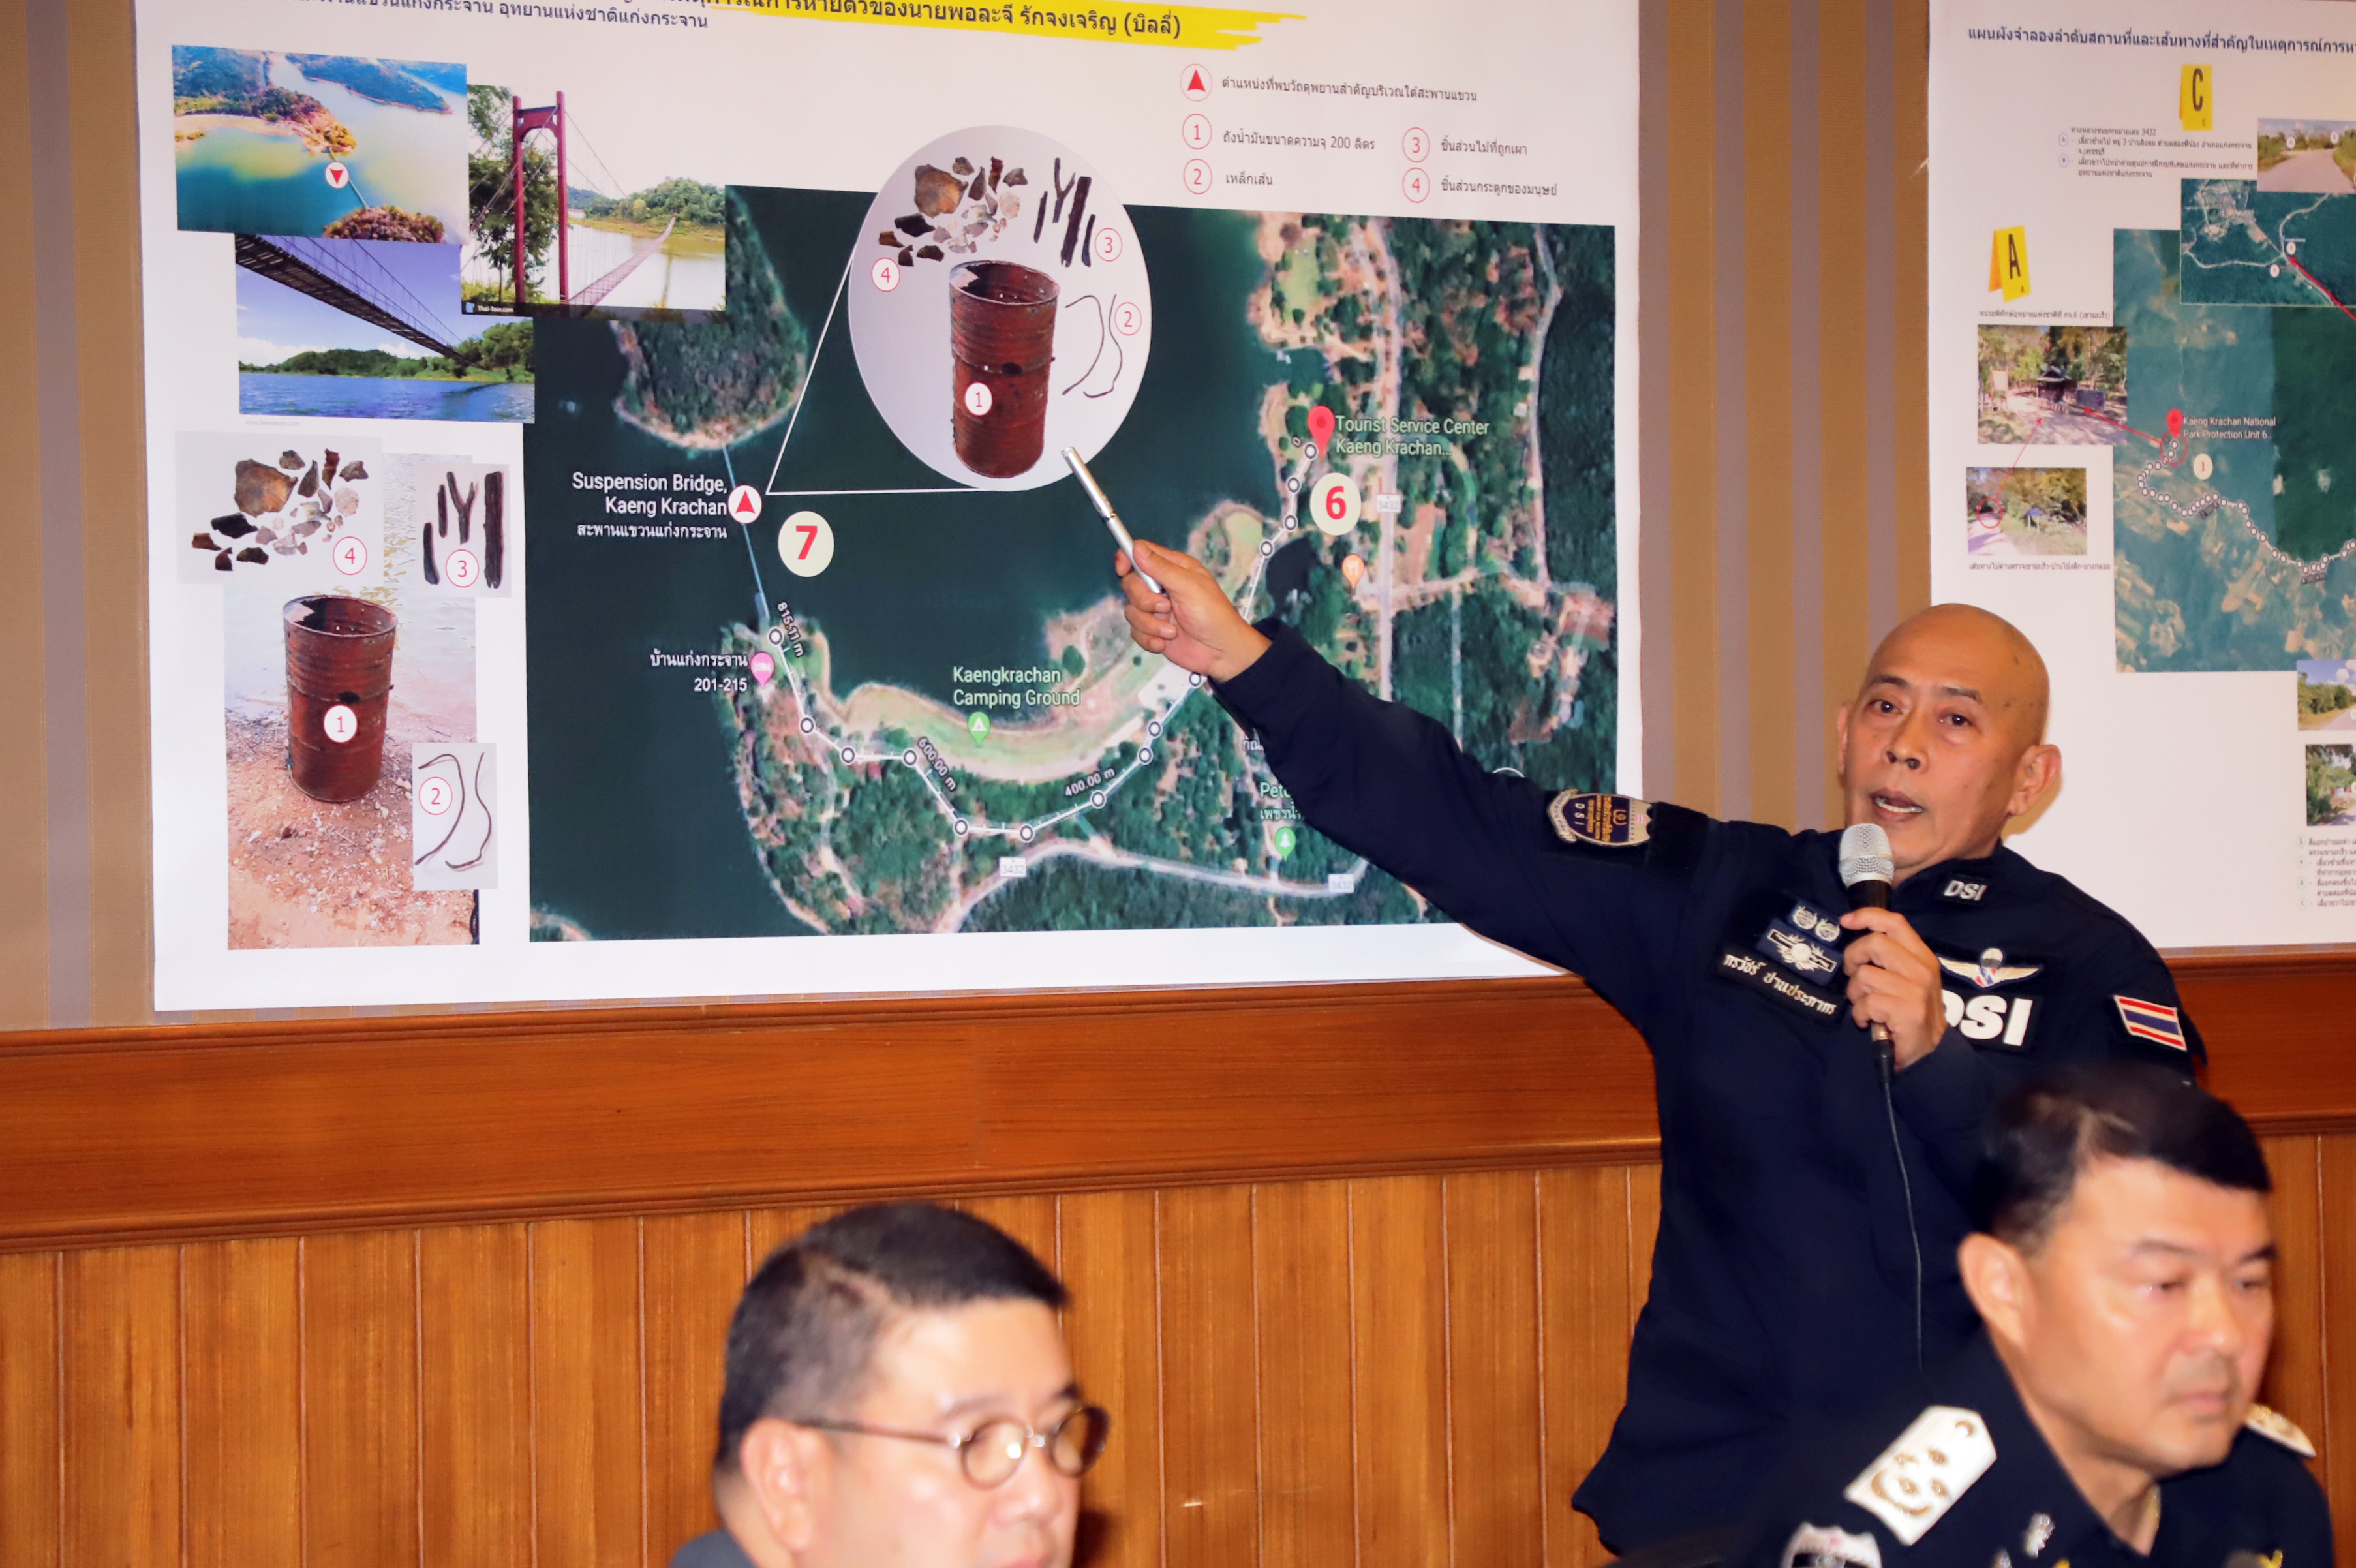 A DSI official pointing at a poster which shows evidence such as an oil drum, two metal rods, bone fragments, and wooden sticks found at the scene during a press conference on Sept. 3.